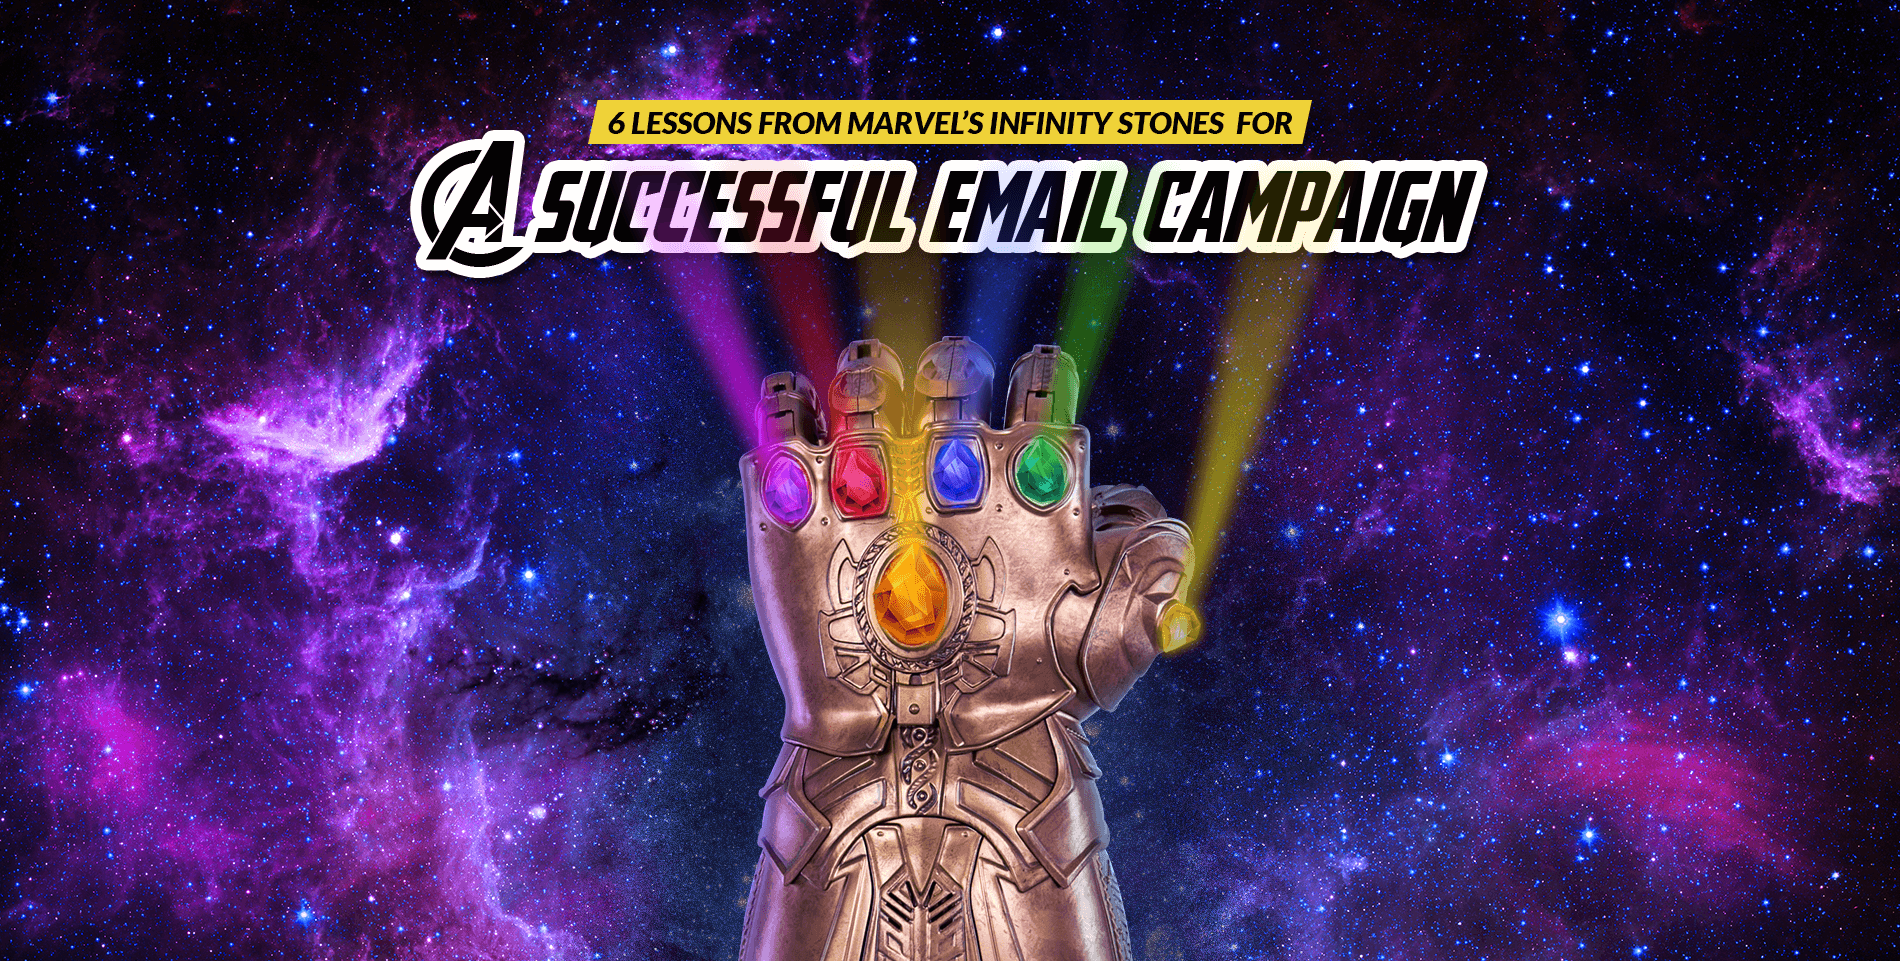 6 Lessons from Marvel's Infinity Stones for a Successful Email Campaign